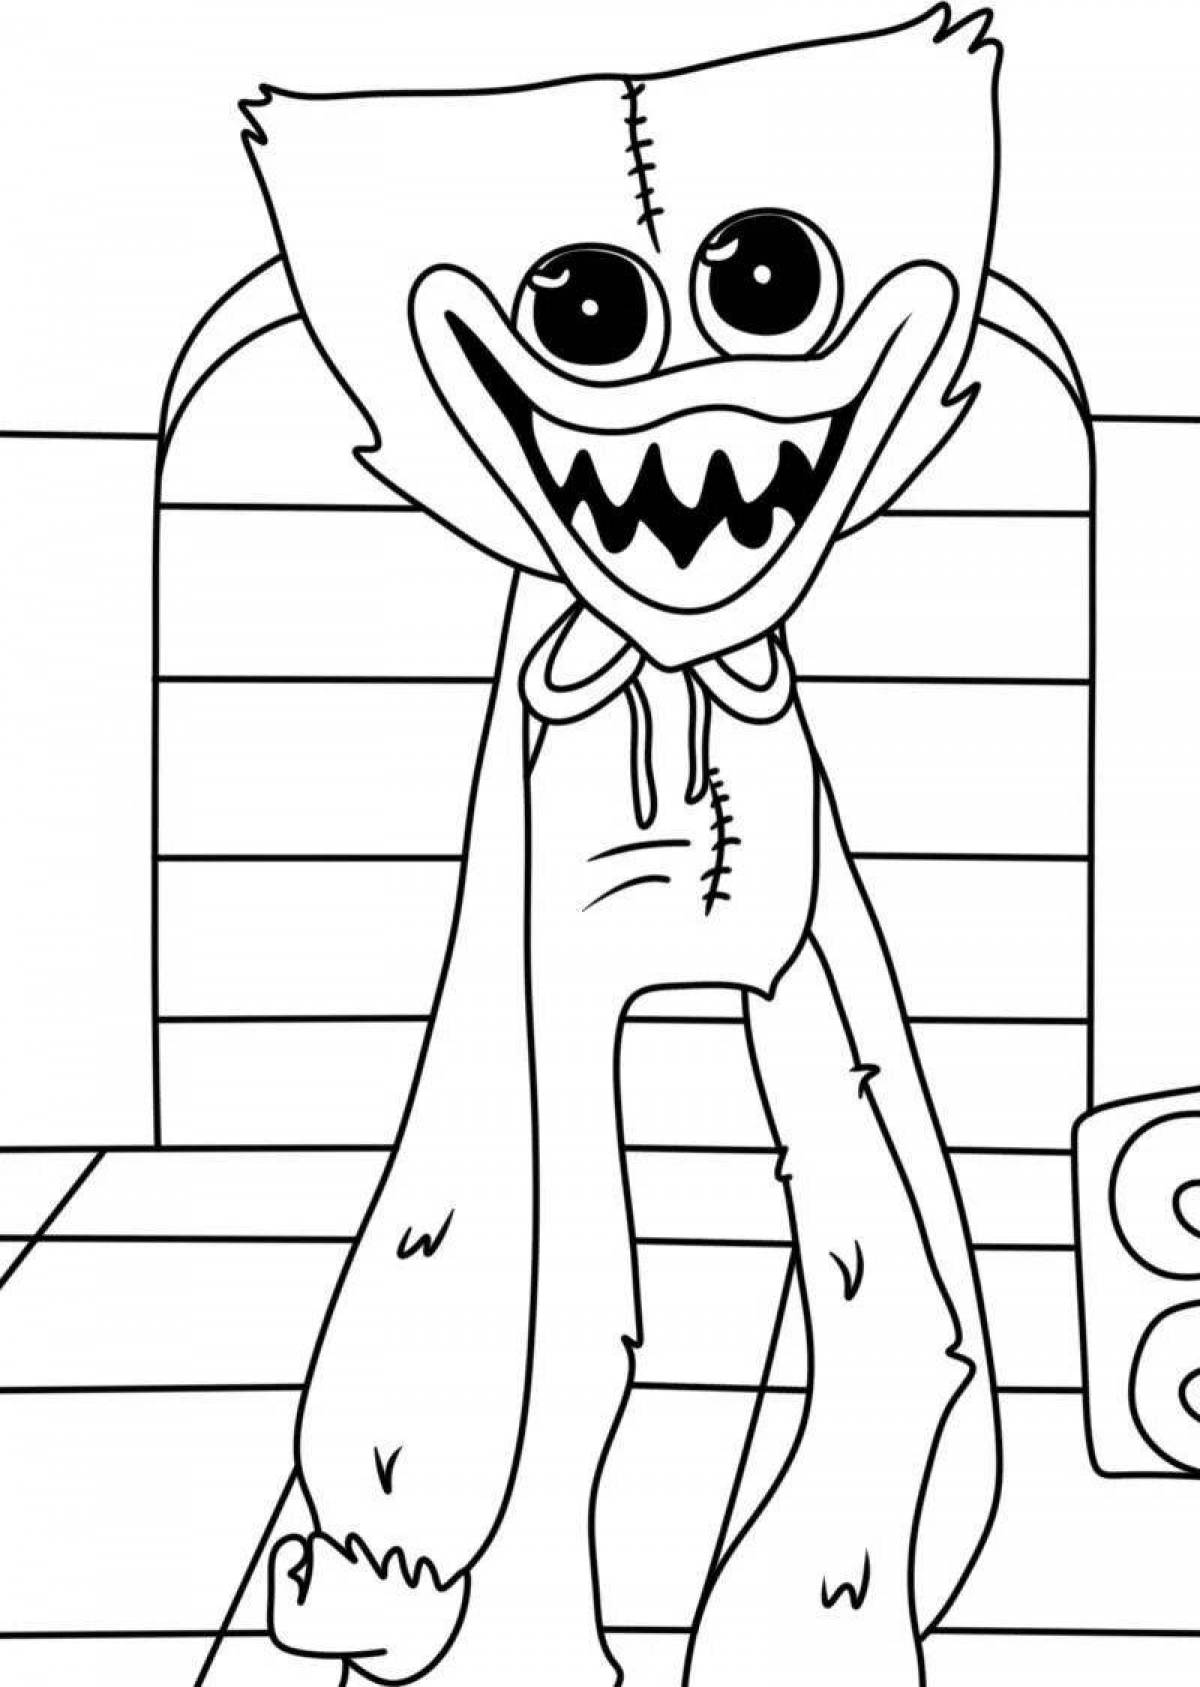 Coloring page amazing long-legged dad